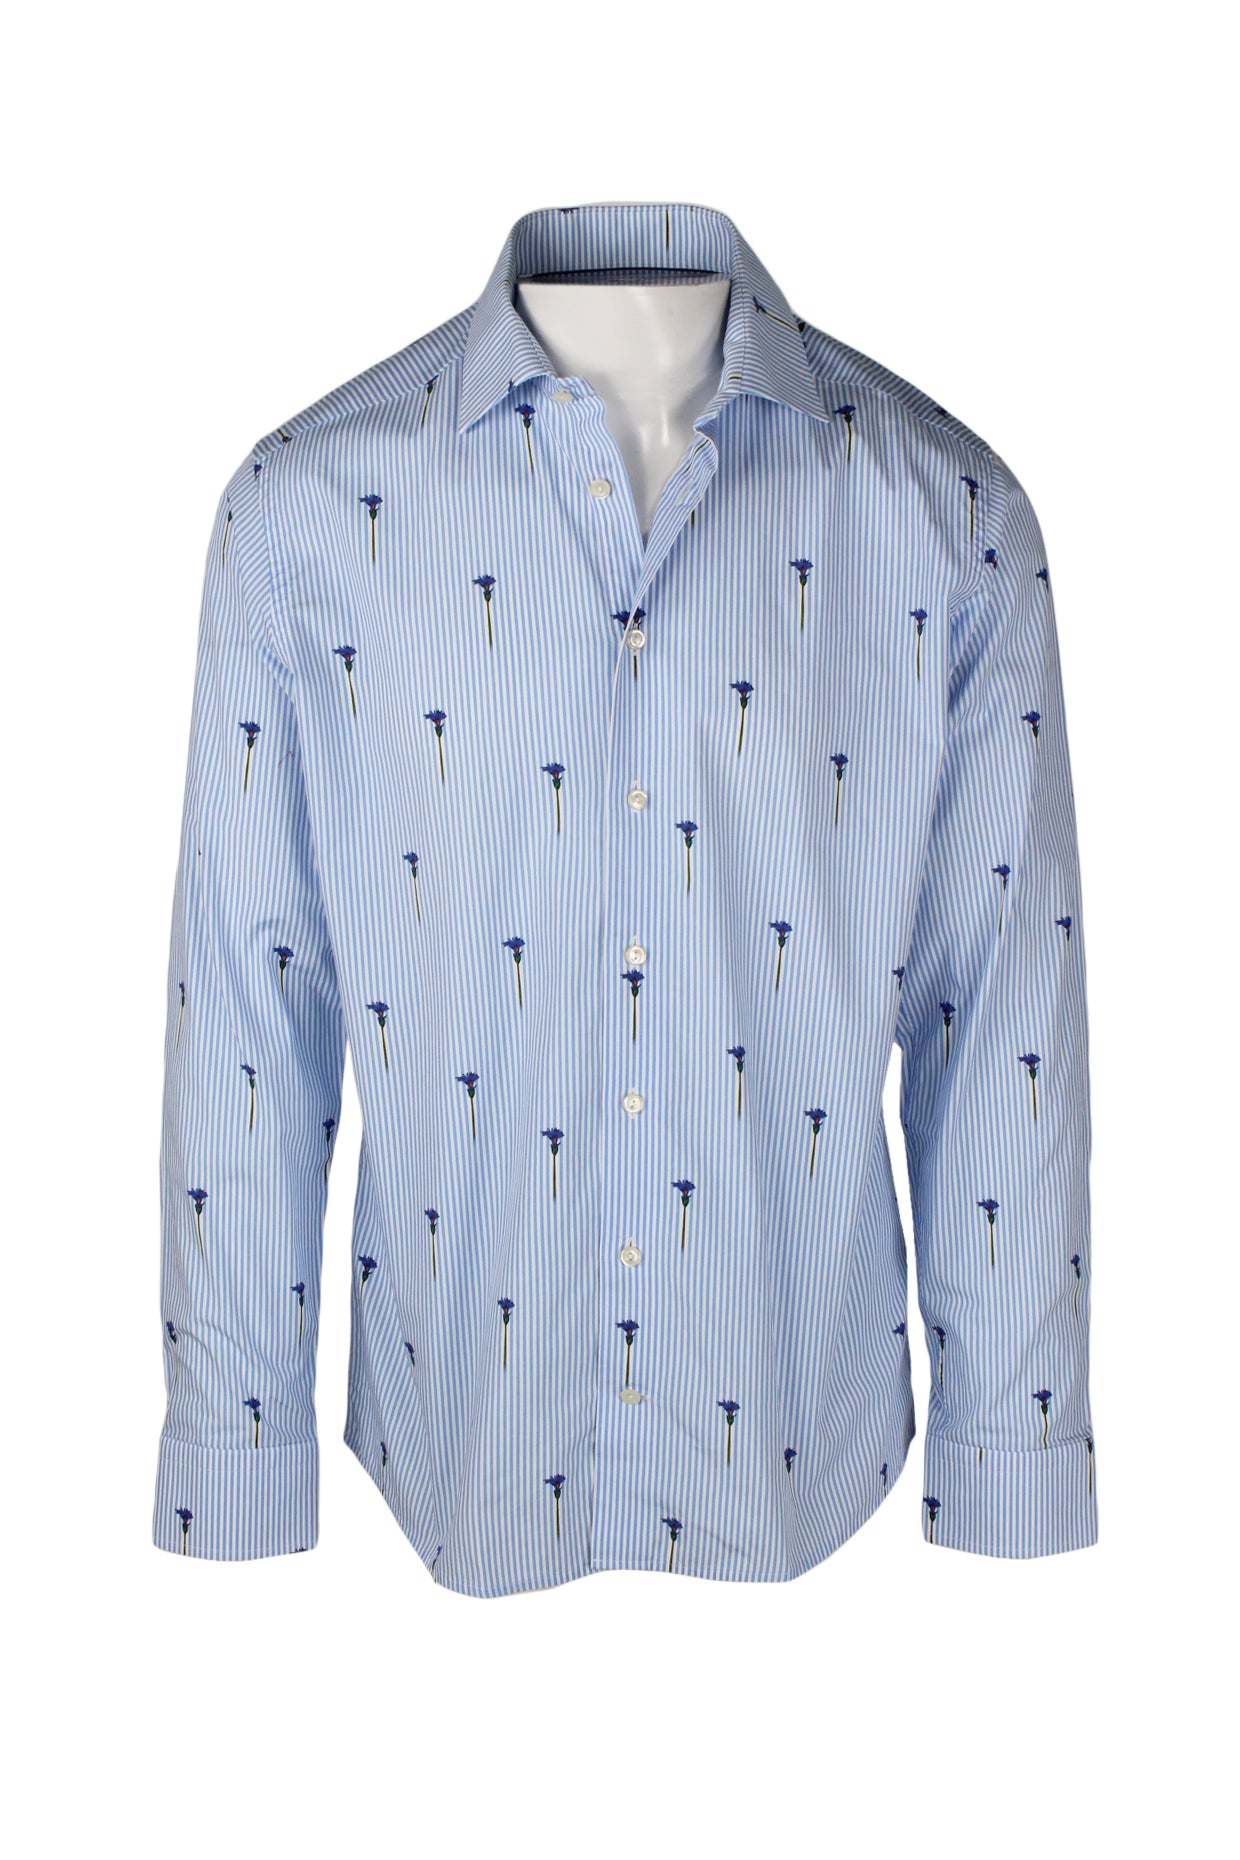 front view of eton blue/white long sleeve button up striped shirt. features flower pattern throughout stripes with buttons at cuffs.